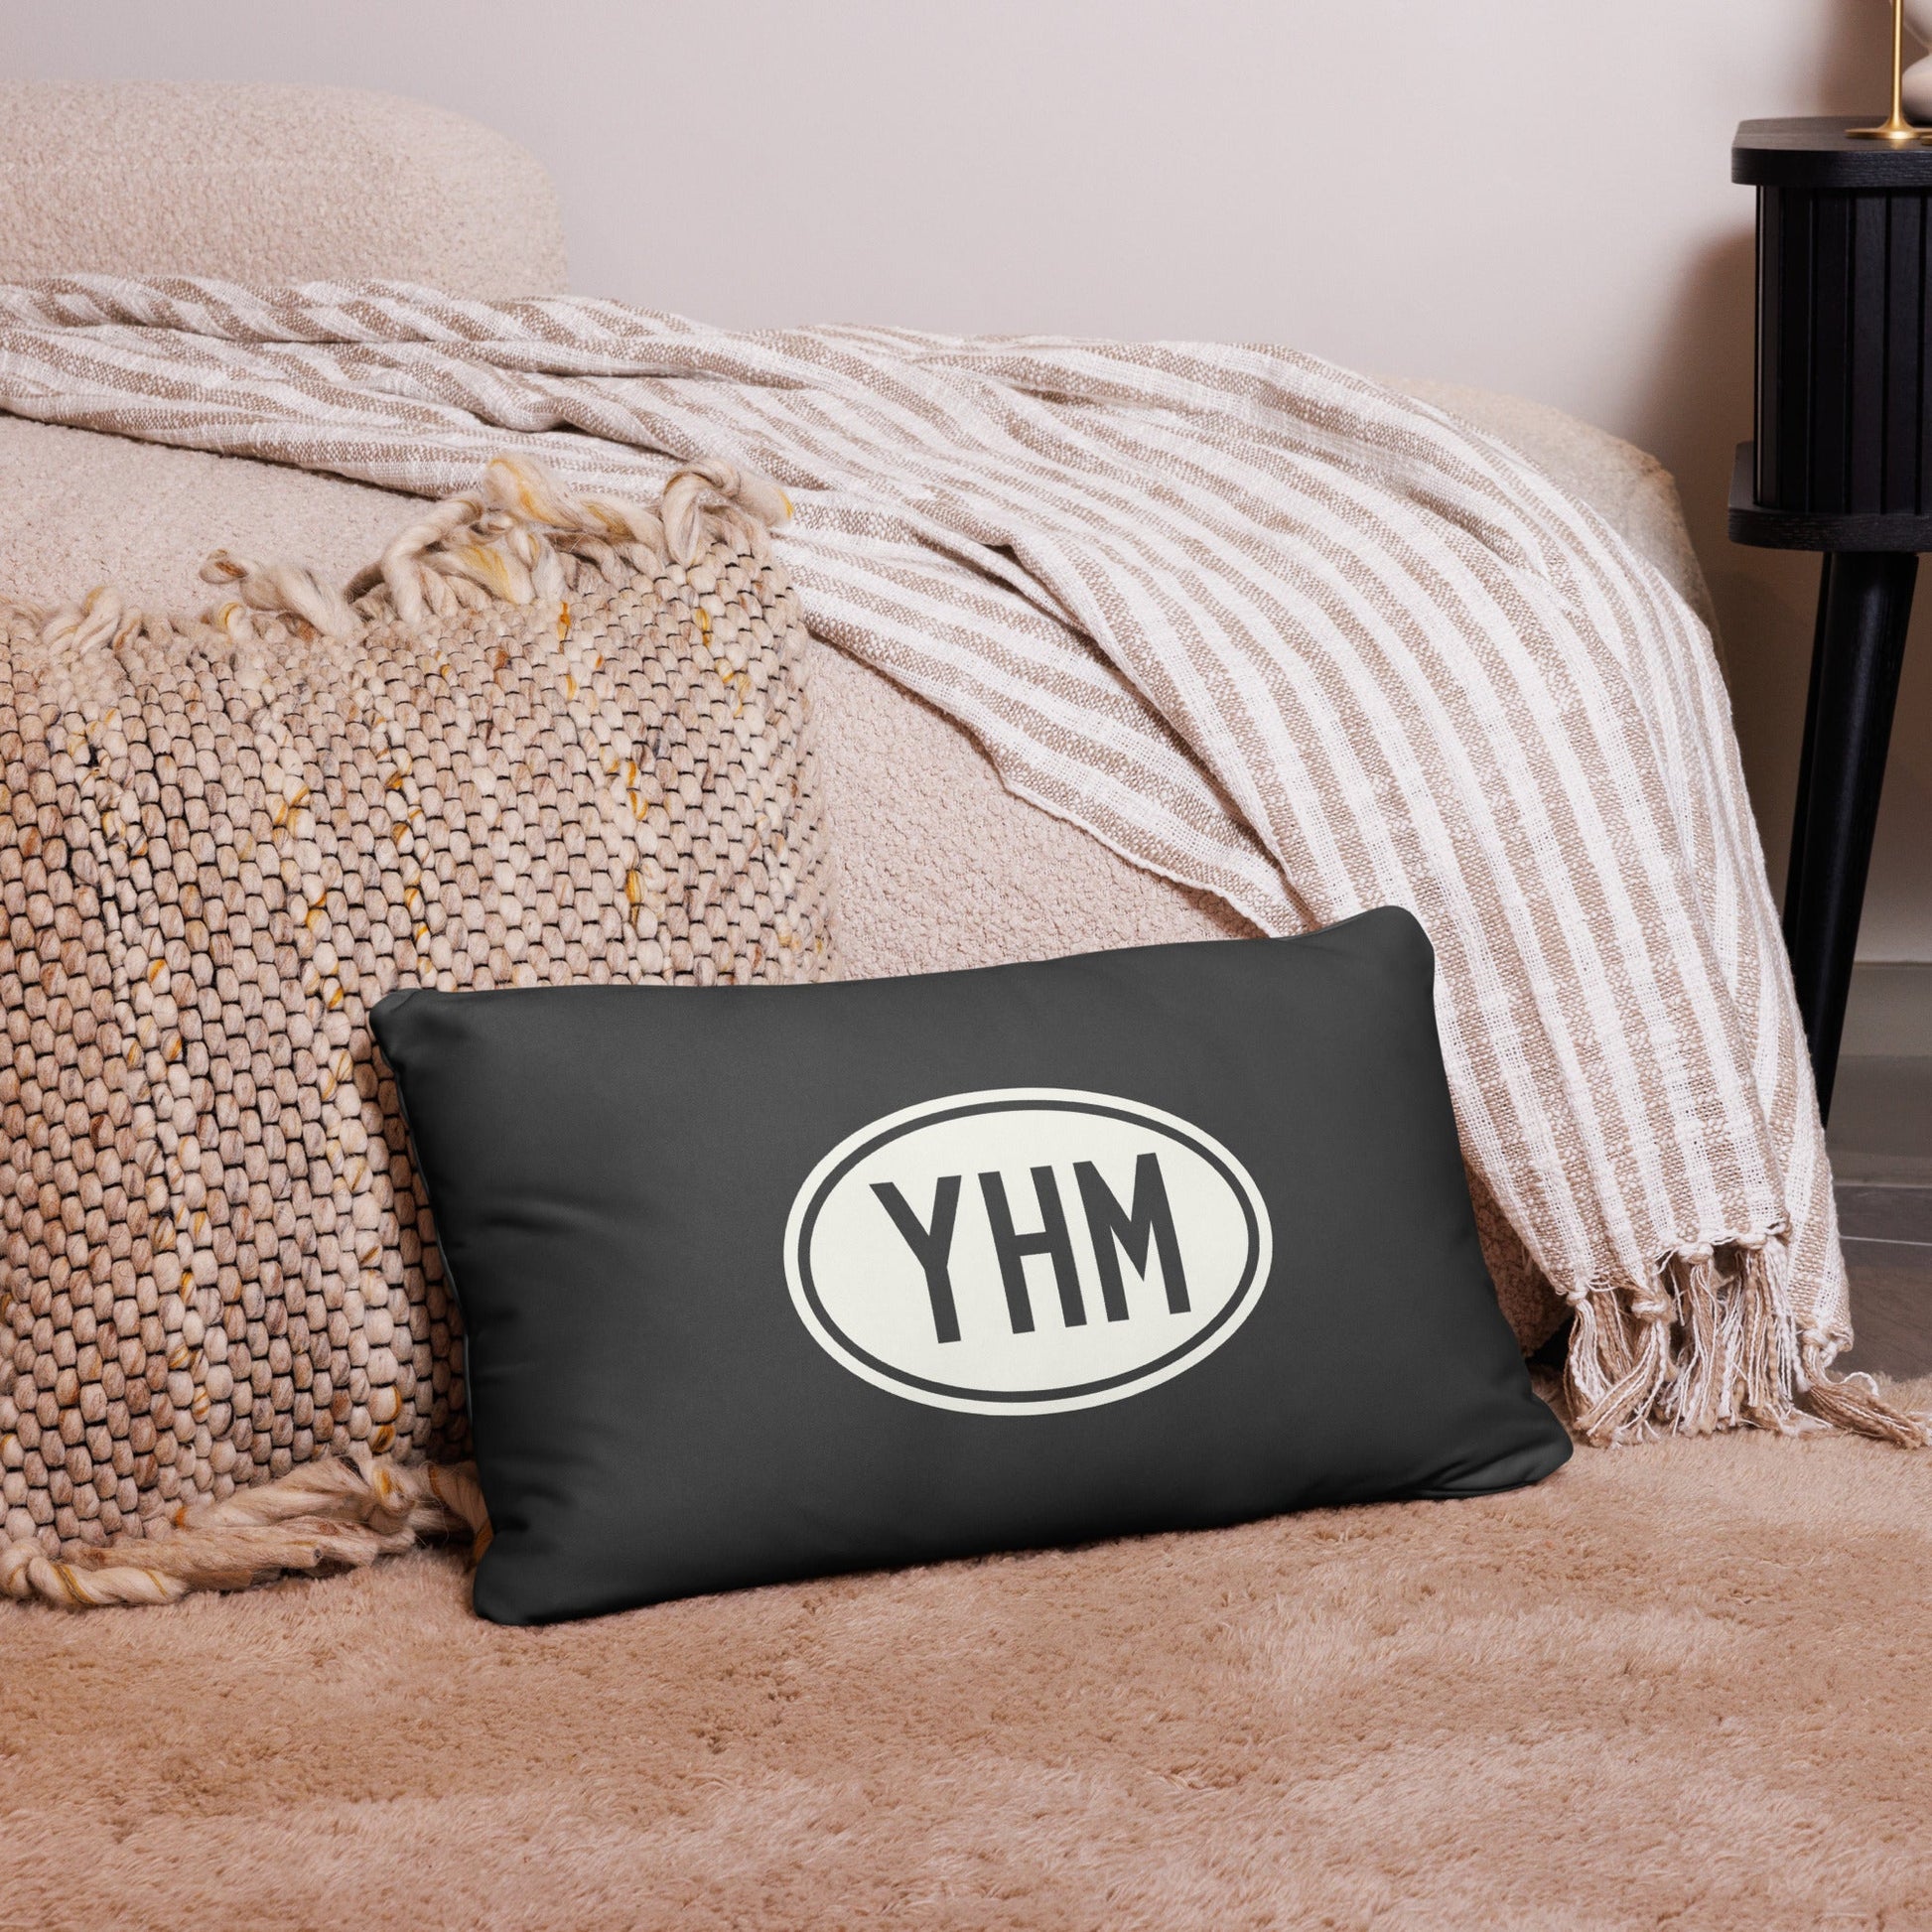 Unique Travel Gift Throw Pillow - White Oval • YYT St. John's • YHM Designs - Image 05